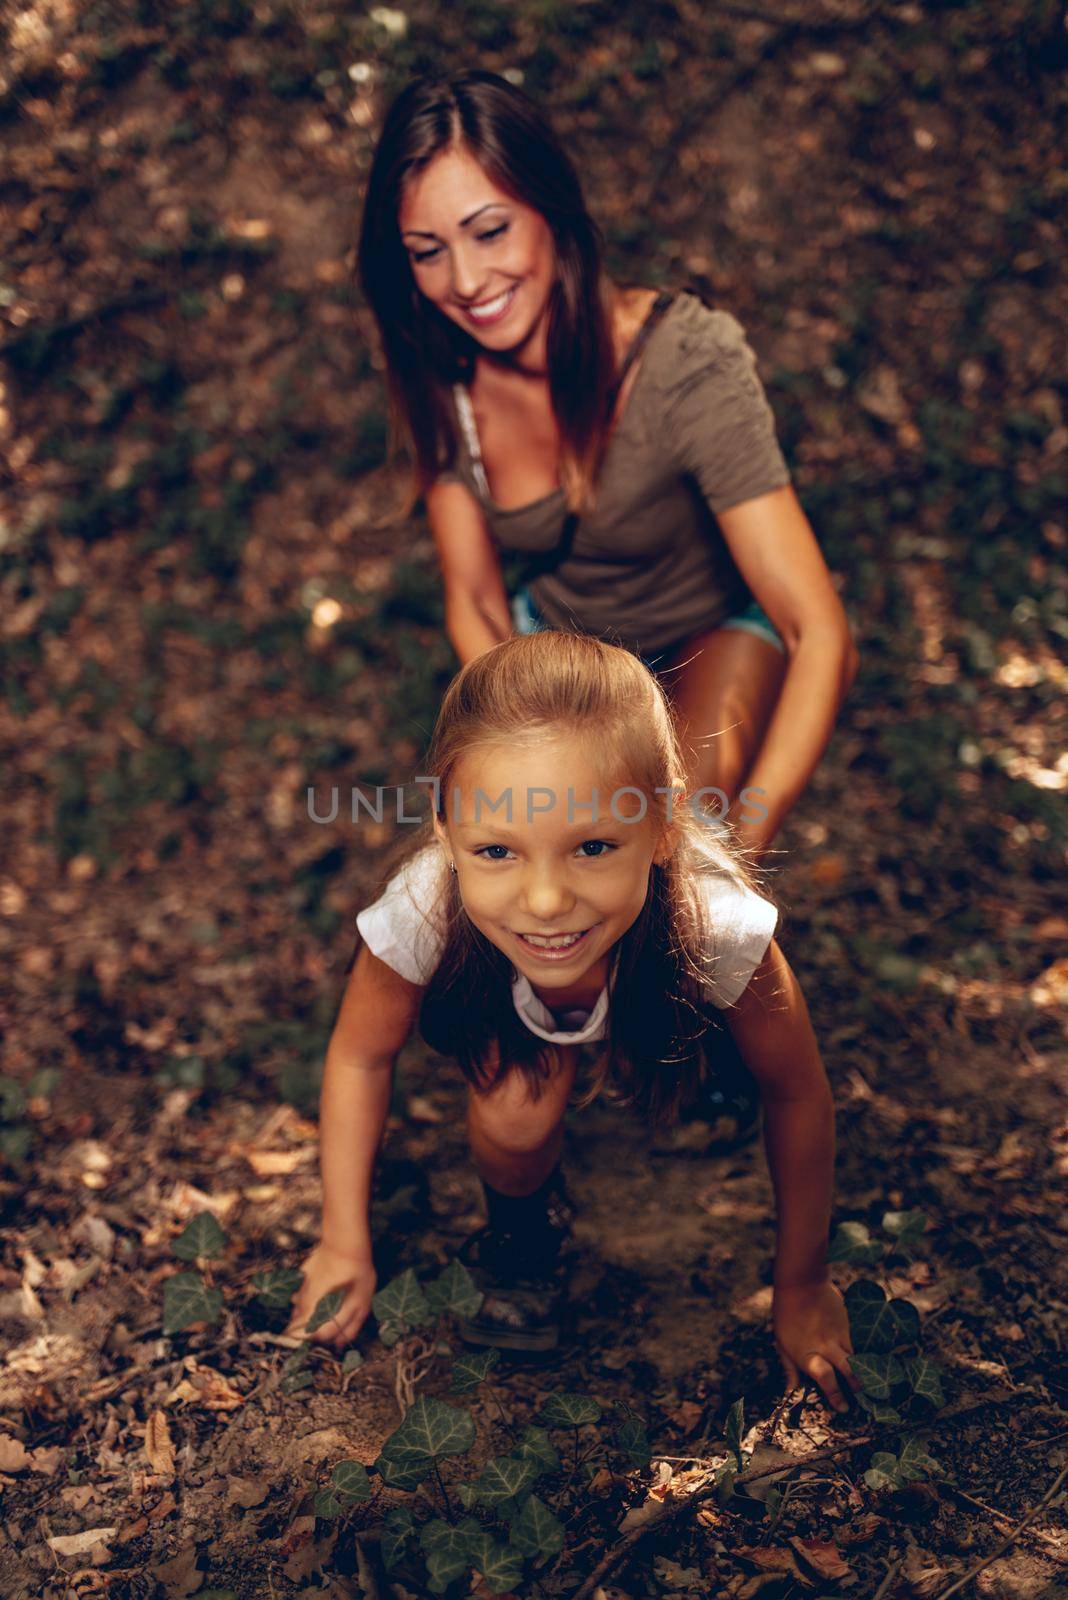 Beautiful young girl having fun in the forest. Mother looking on her.